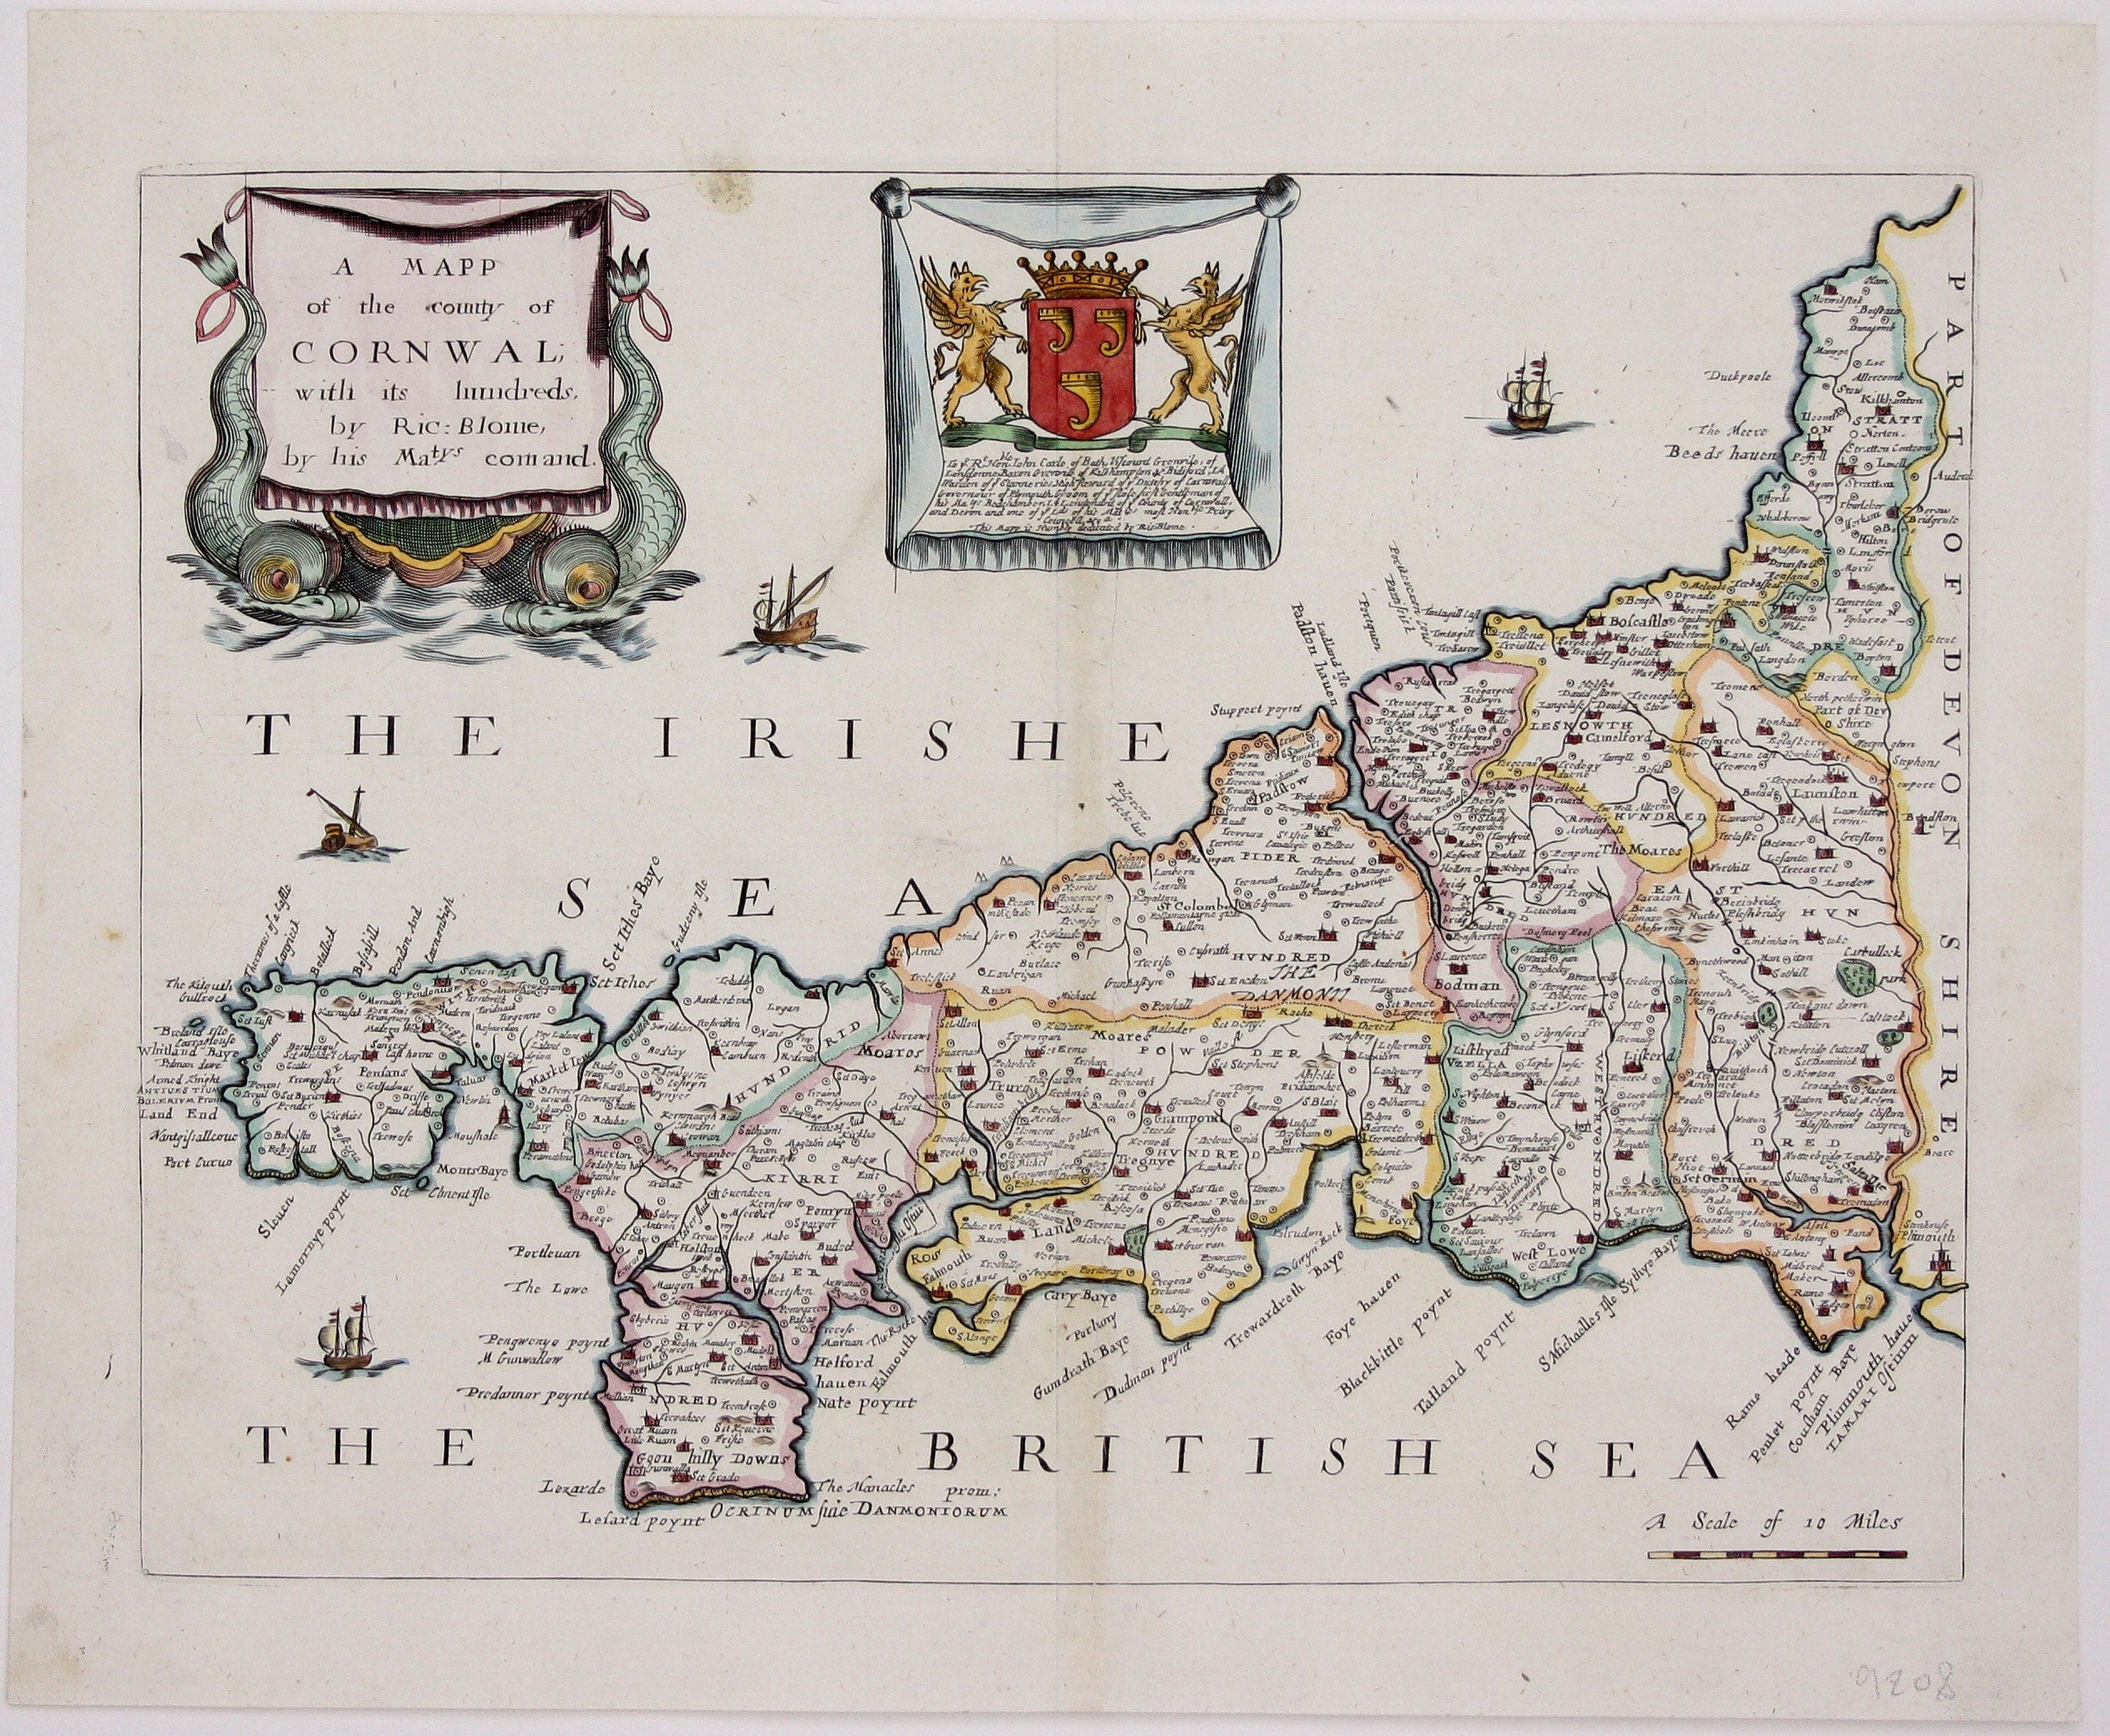 Blome’s Map of Cornwall